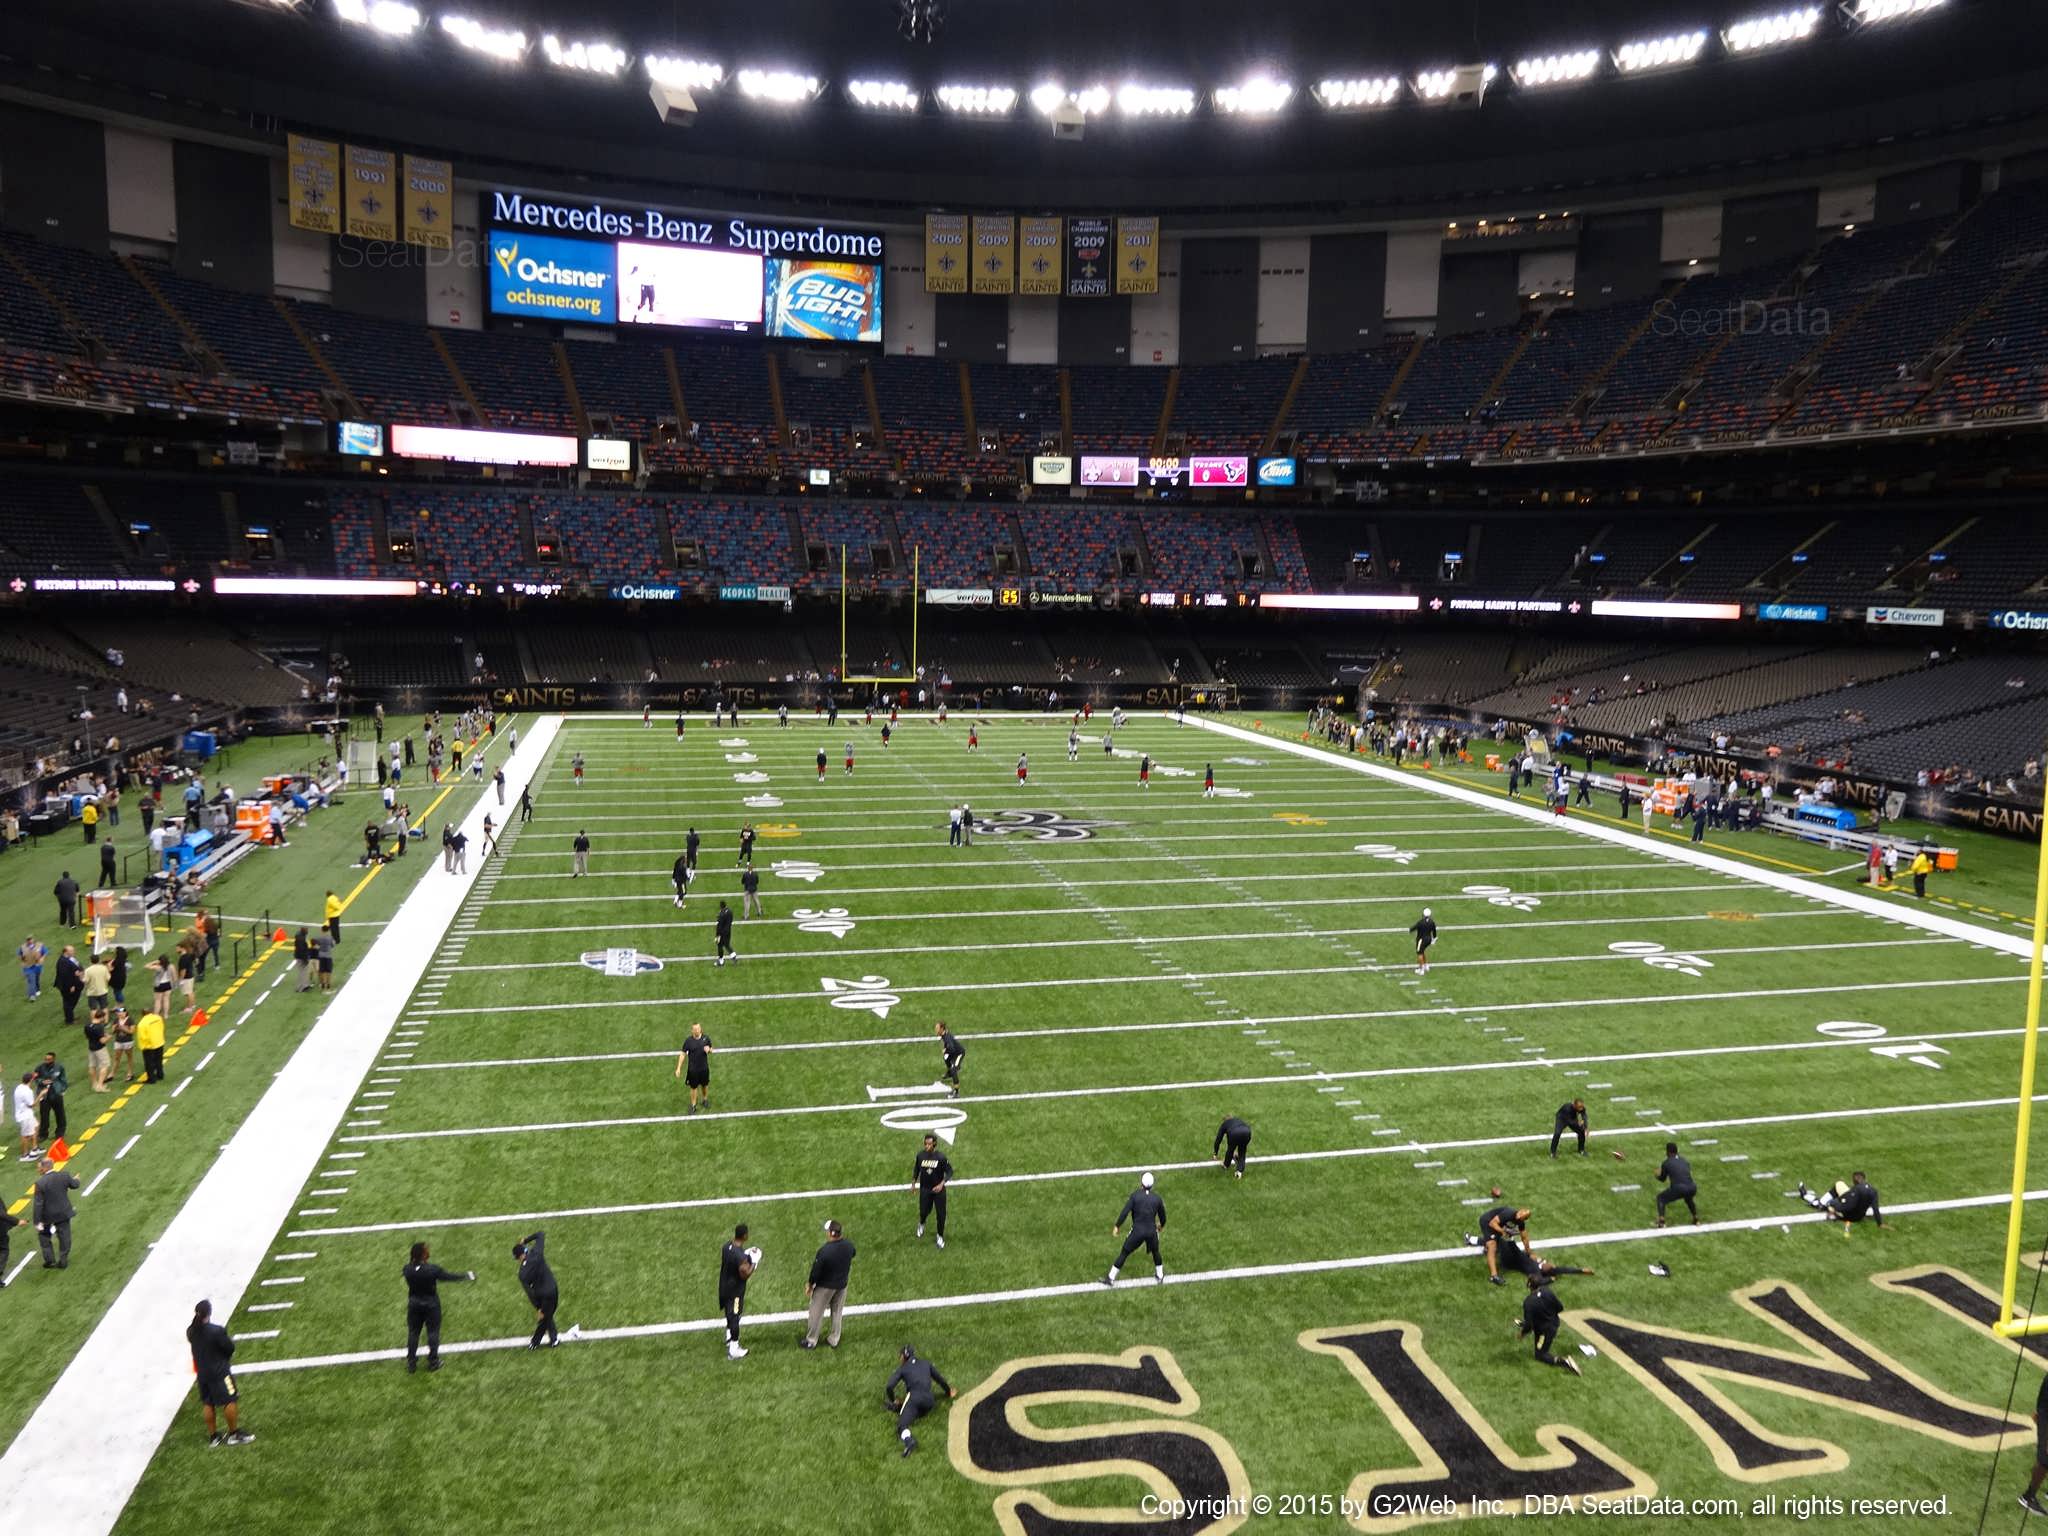 Seat view from section 245 at the Mercedes-Benz Superdome, home of the New Orleans Saints